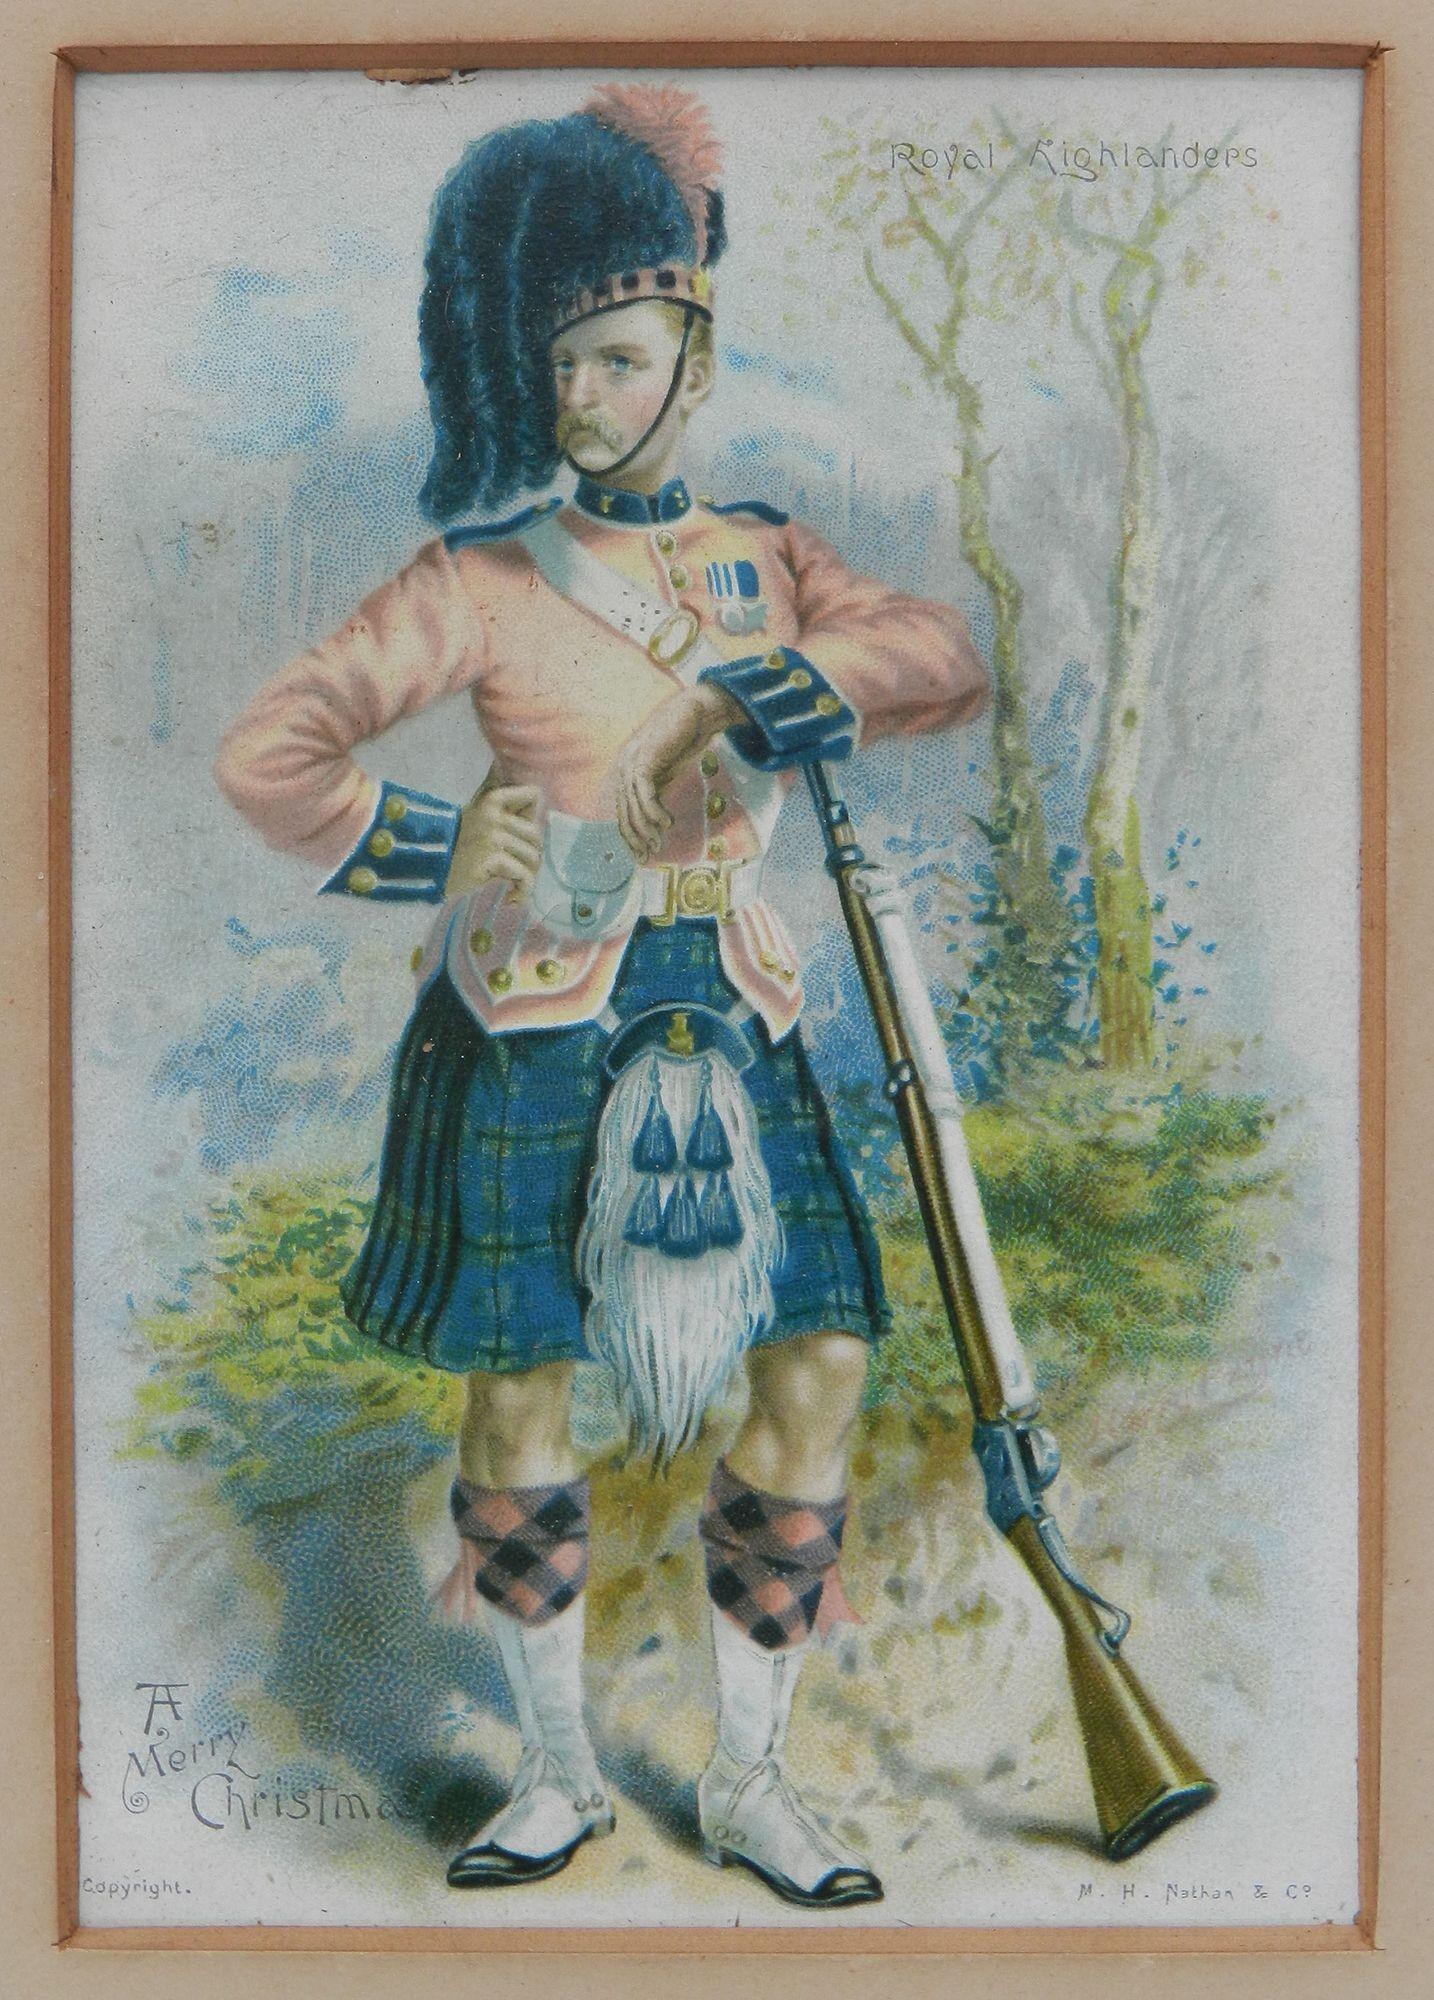 Militaria Postcards Royal Horse Guards Scottish Highlands by Harry Payne 1858- 1927 etc
Scottish Rifles, Guardian Guards
Some marked with the Compliments of the Season
English Military Painter
Harry Joseph Payne born in Newington London
He worked